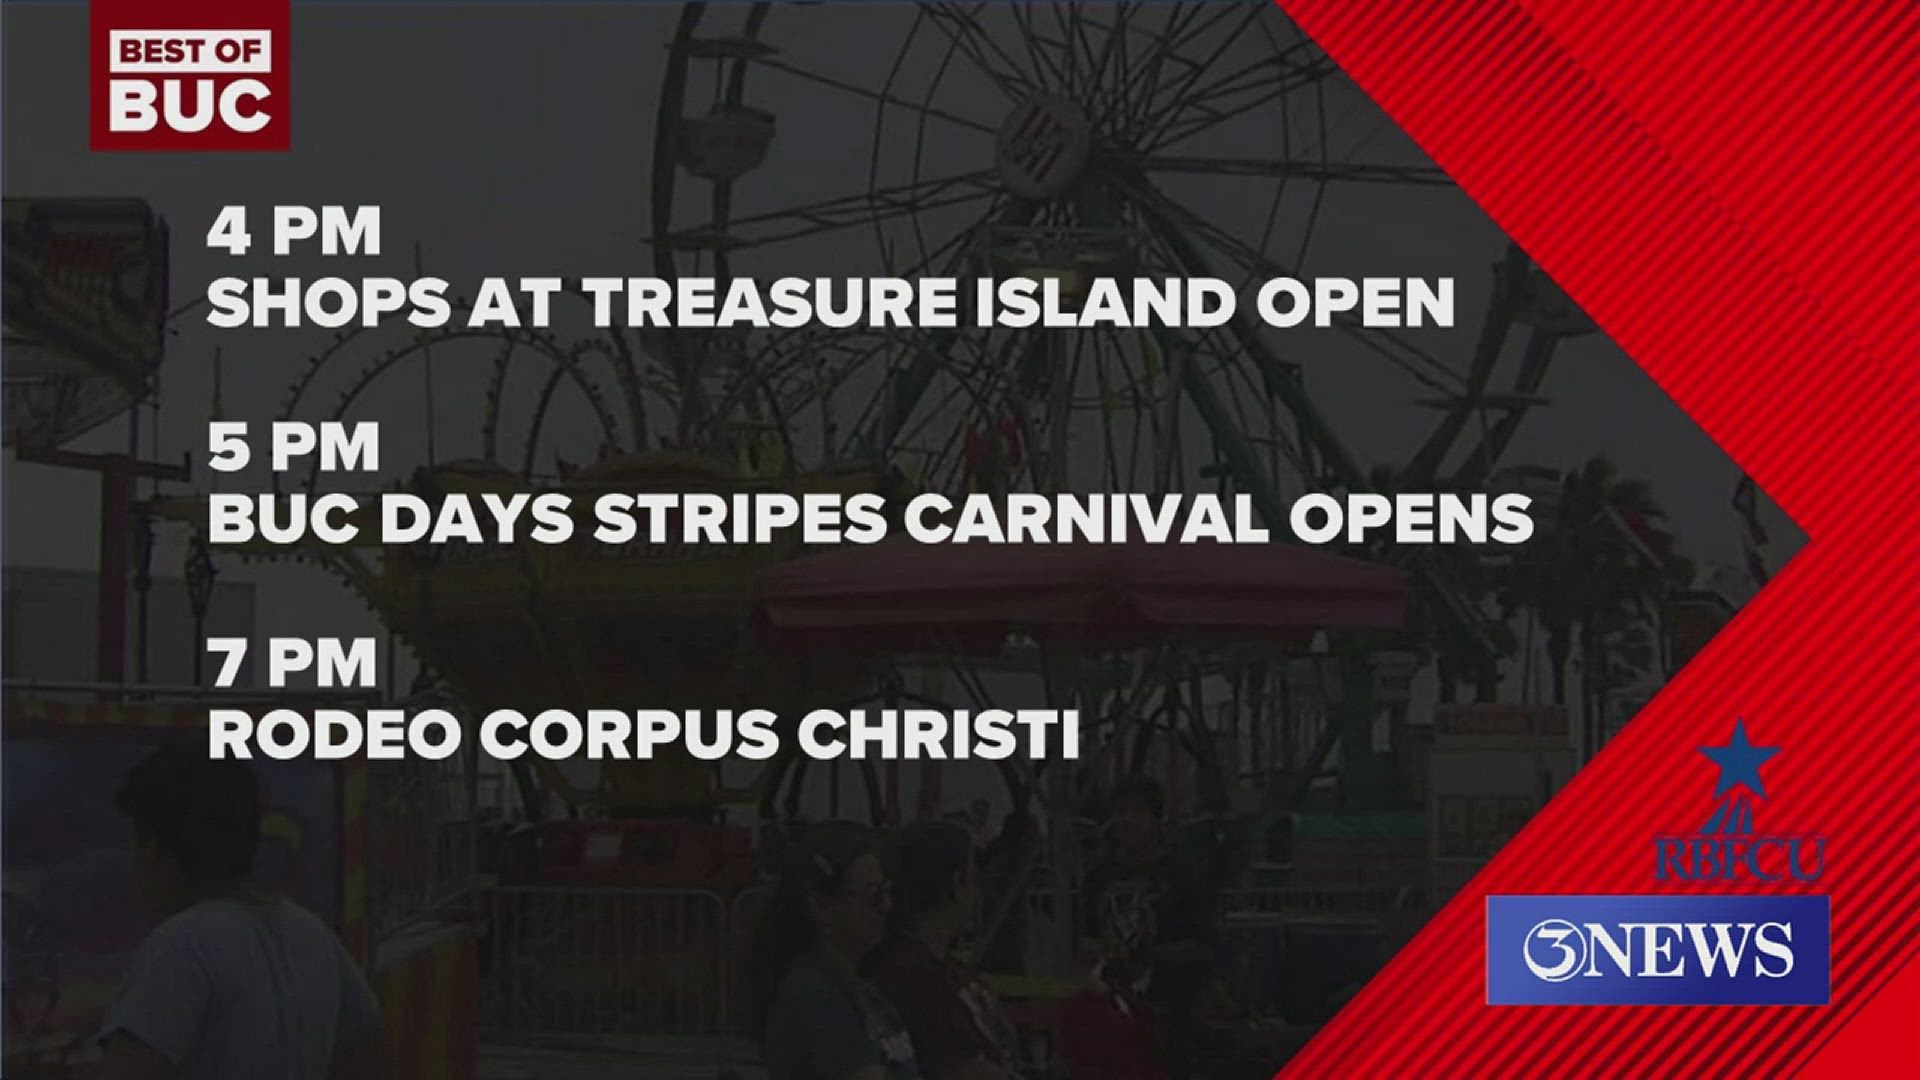 Rodeo Corpus Christi has kicked off and as part of the Rodeo Concert Series, Bret Michaels will be performing Wednesday night.